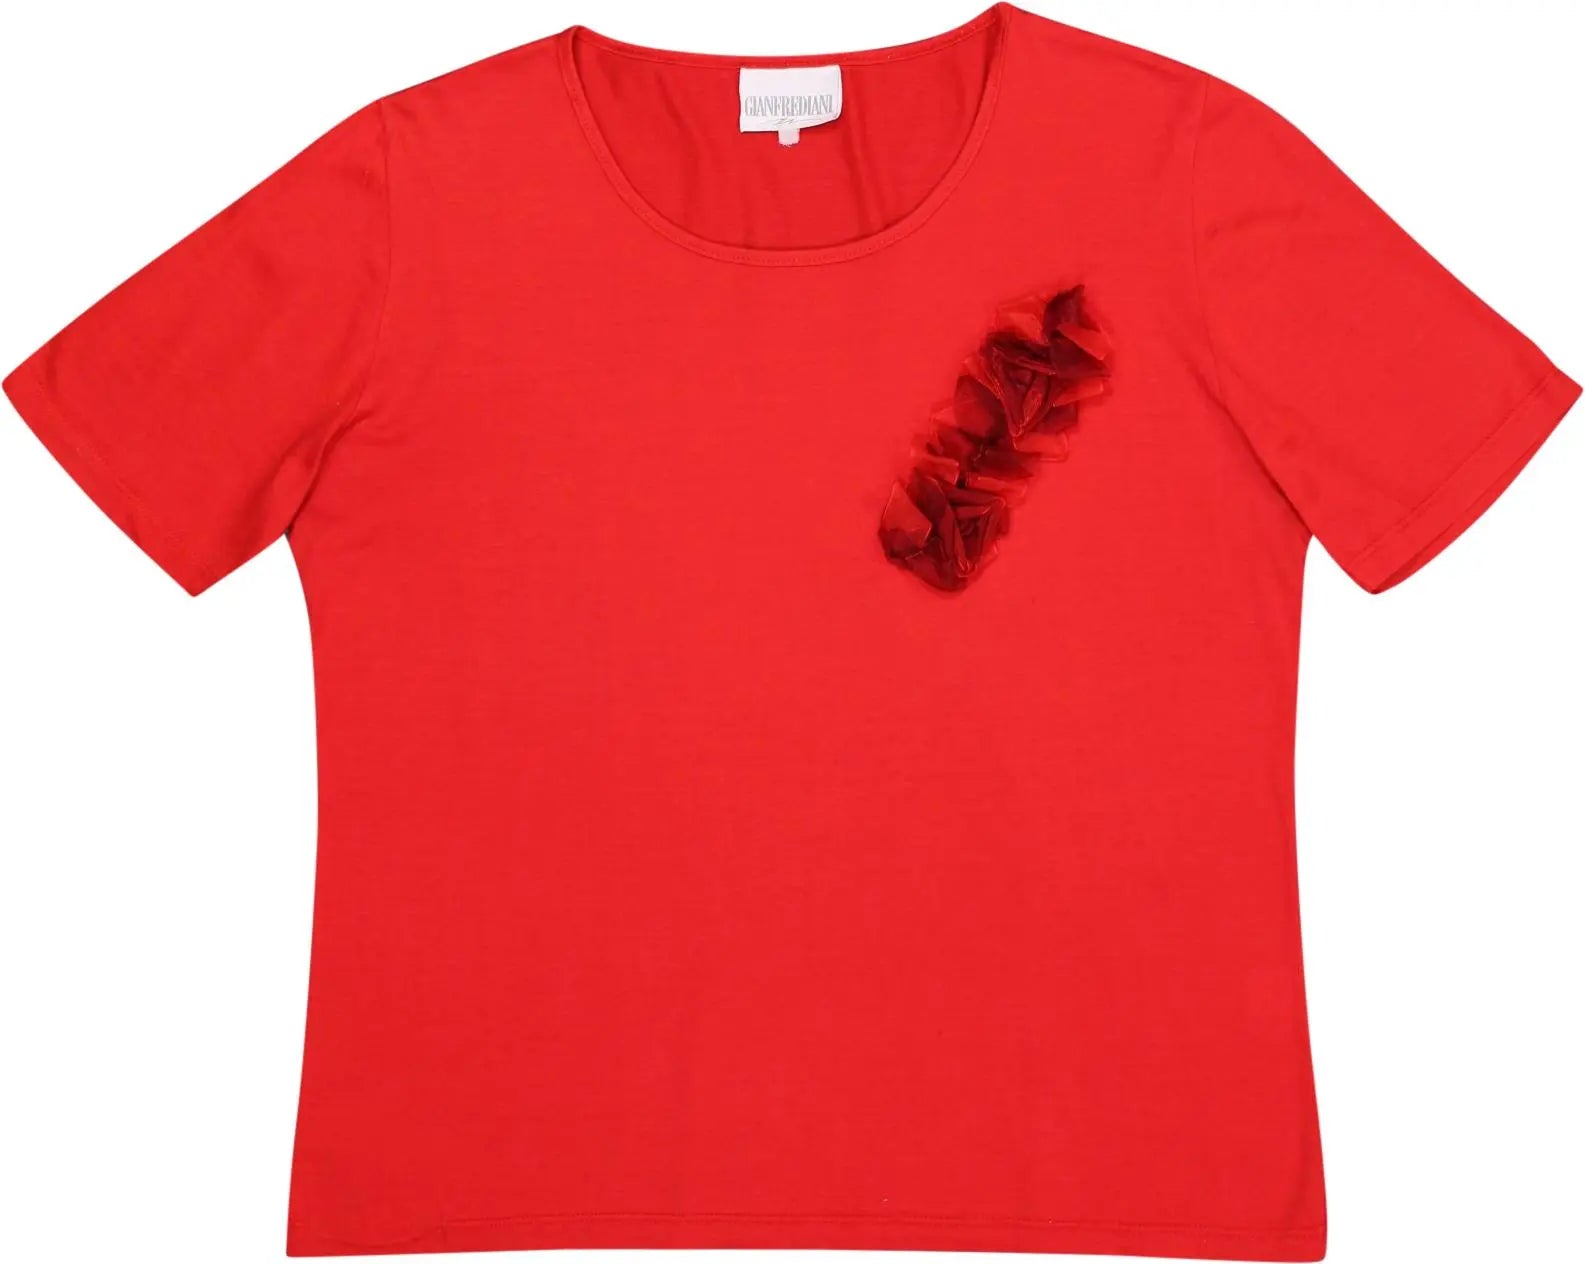 Gianfrediani - Red T-shirt by Gianfrediani- ThriftTale.com - Vintage and second handclothing